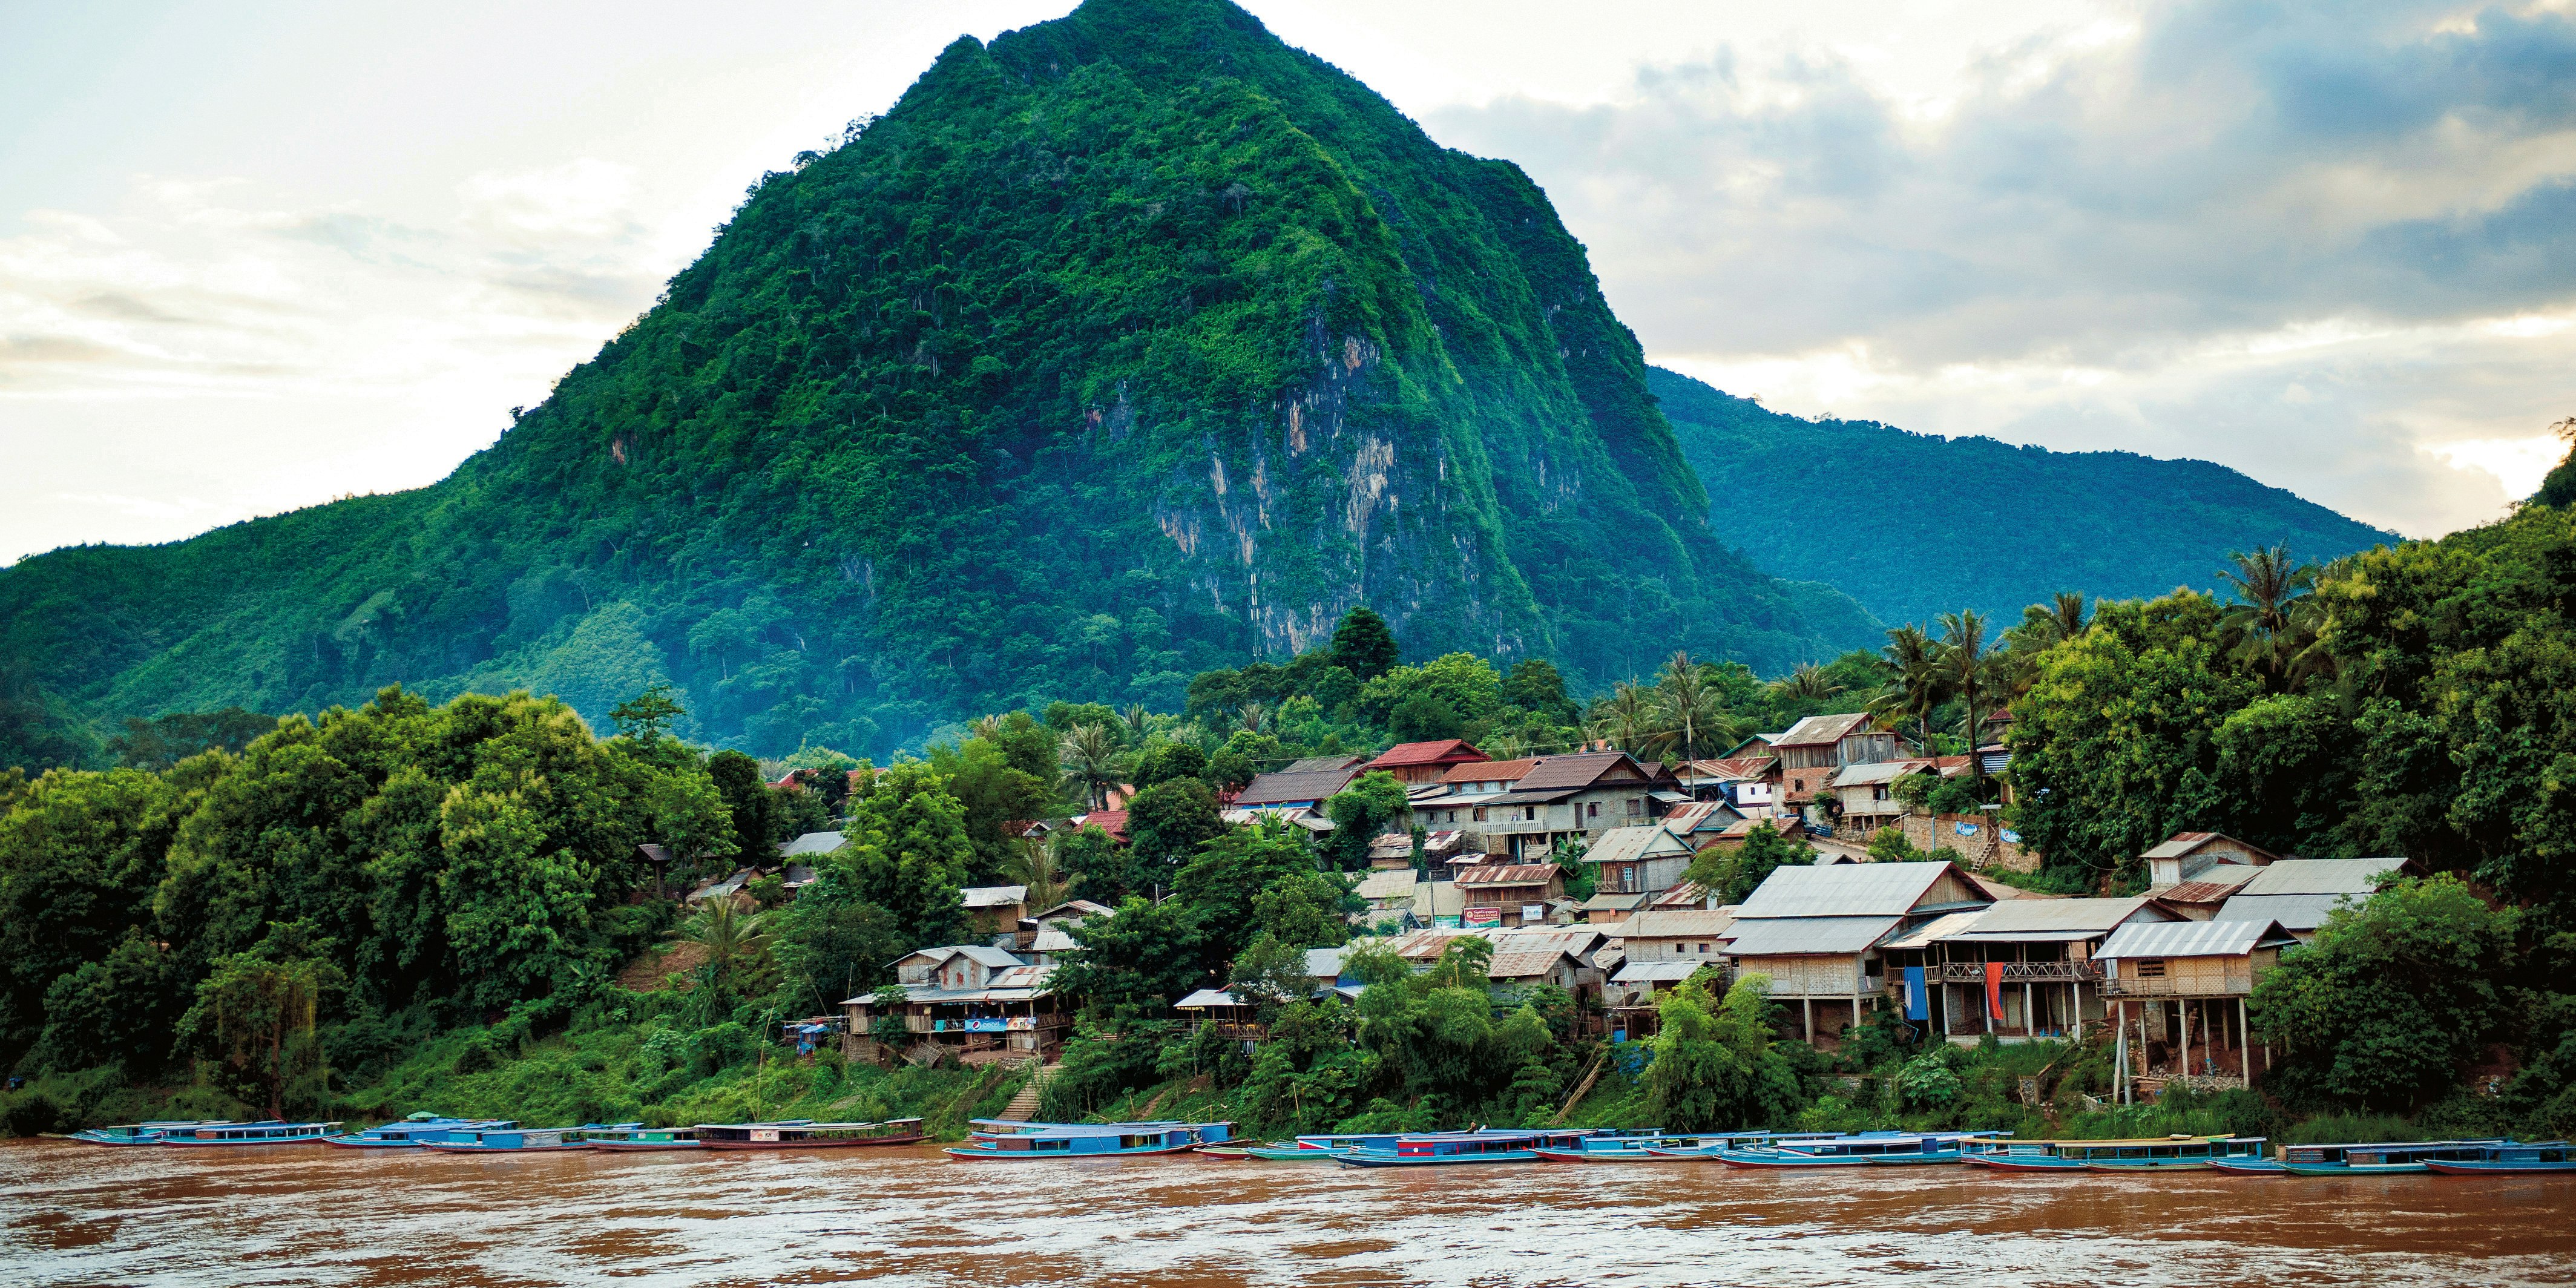 A to Z: Everything You Need to Know About Traveling to Laos